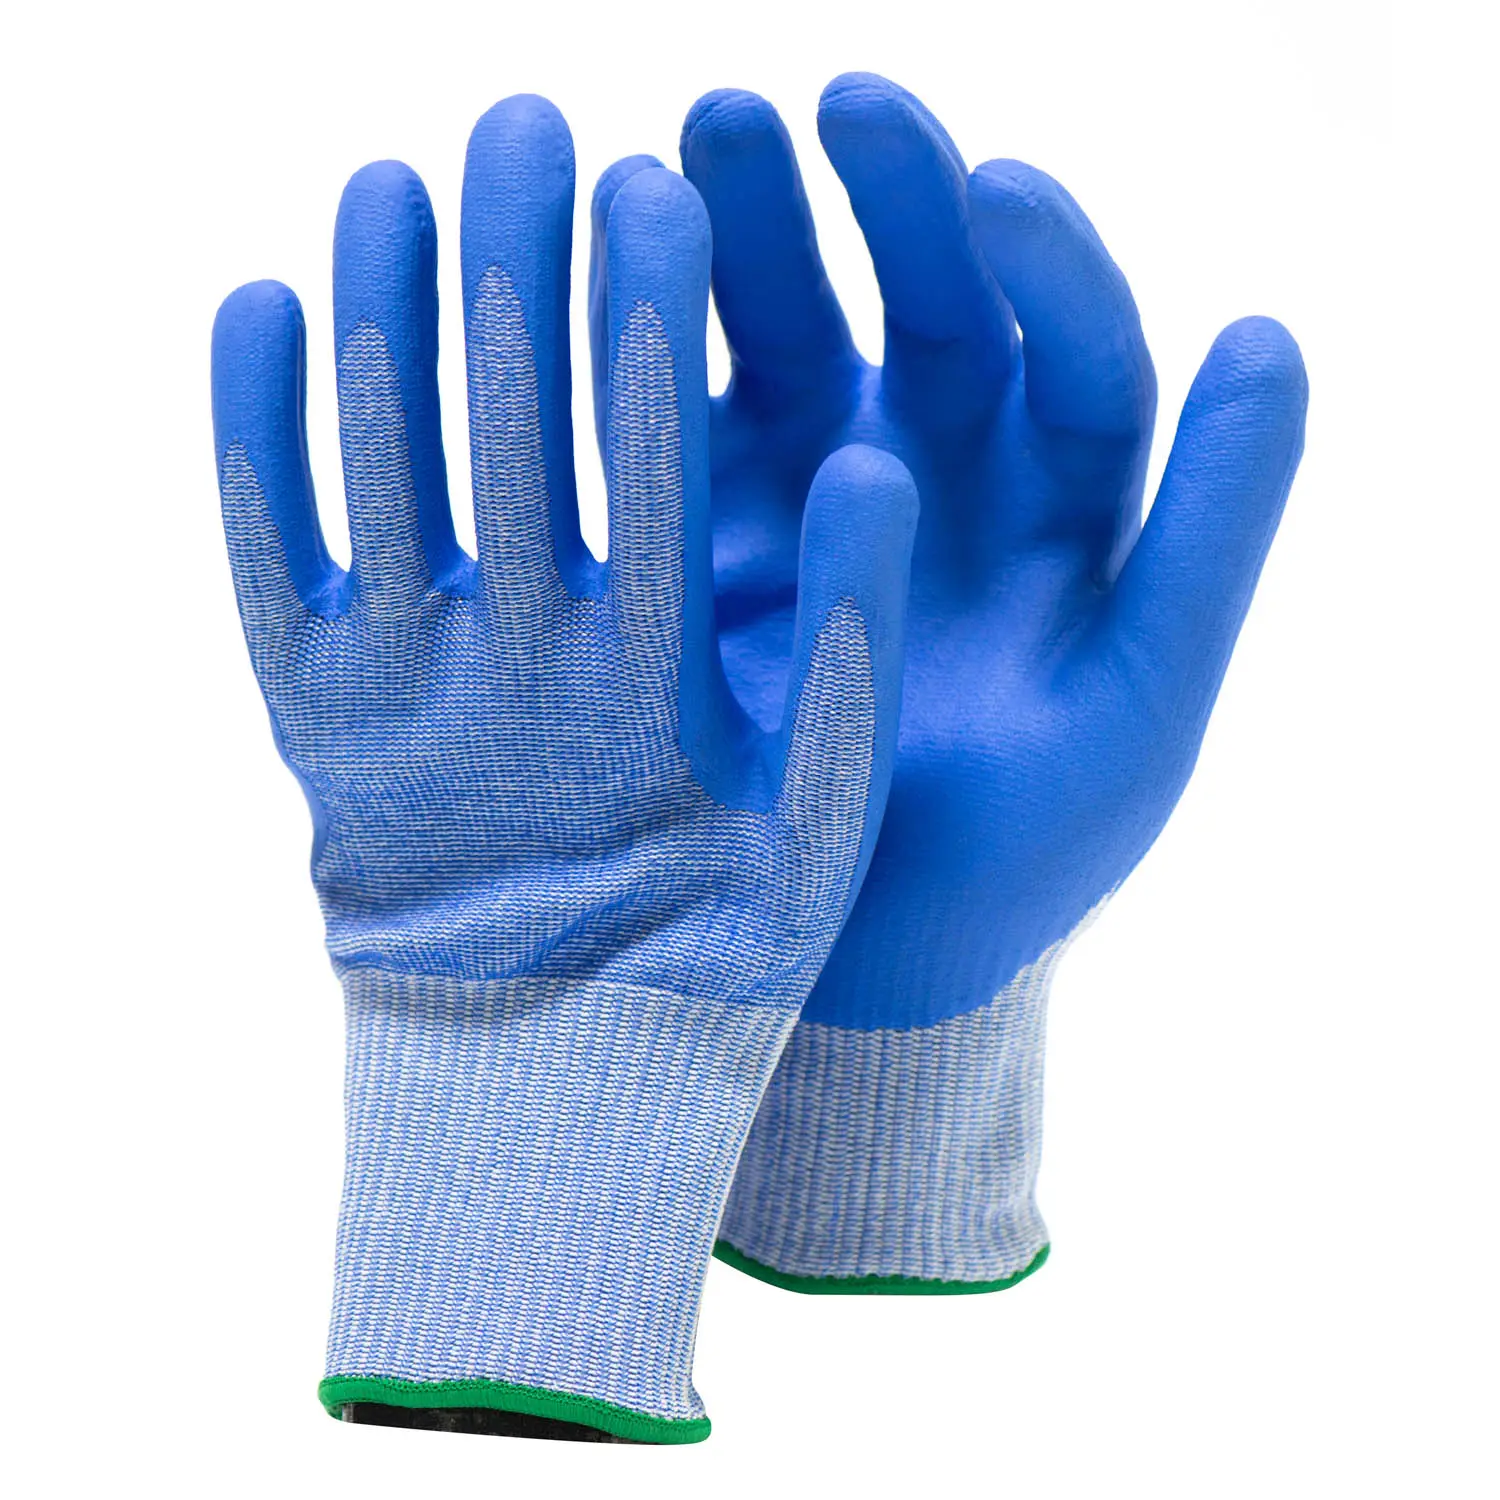 Safety Gloves U2 Knitted Anti Cut Hand Protect Safety Gloves Level 5